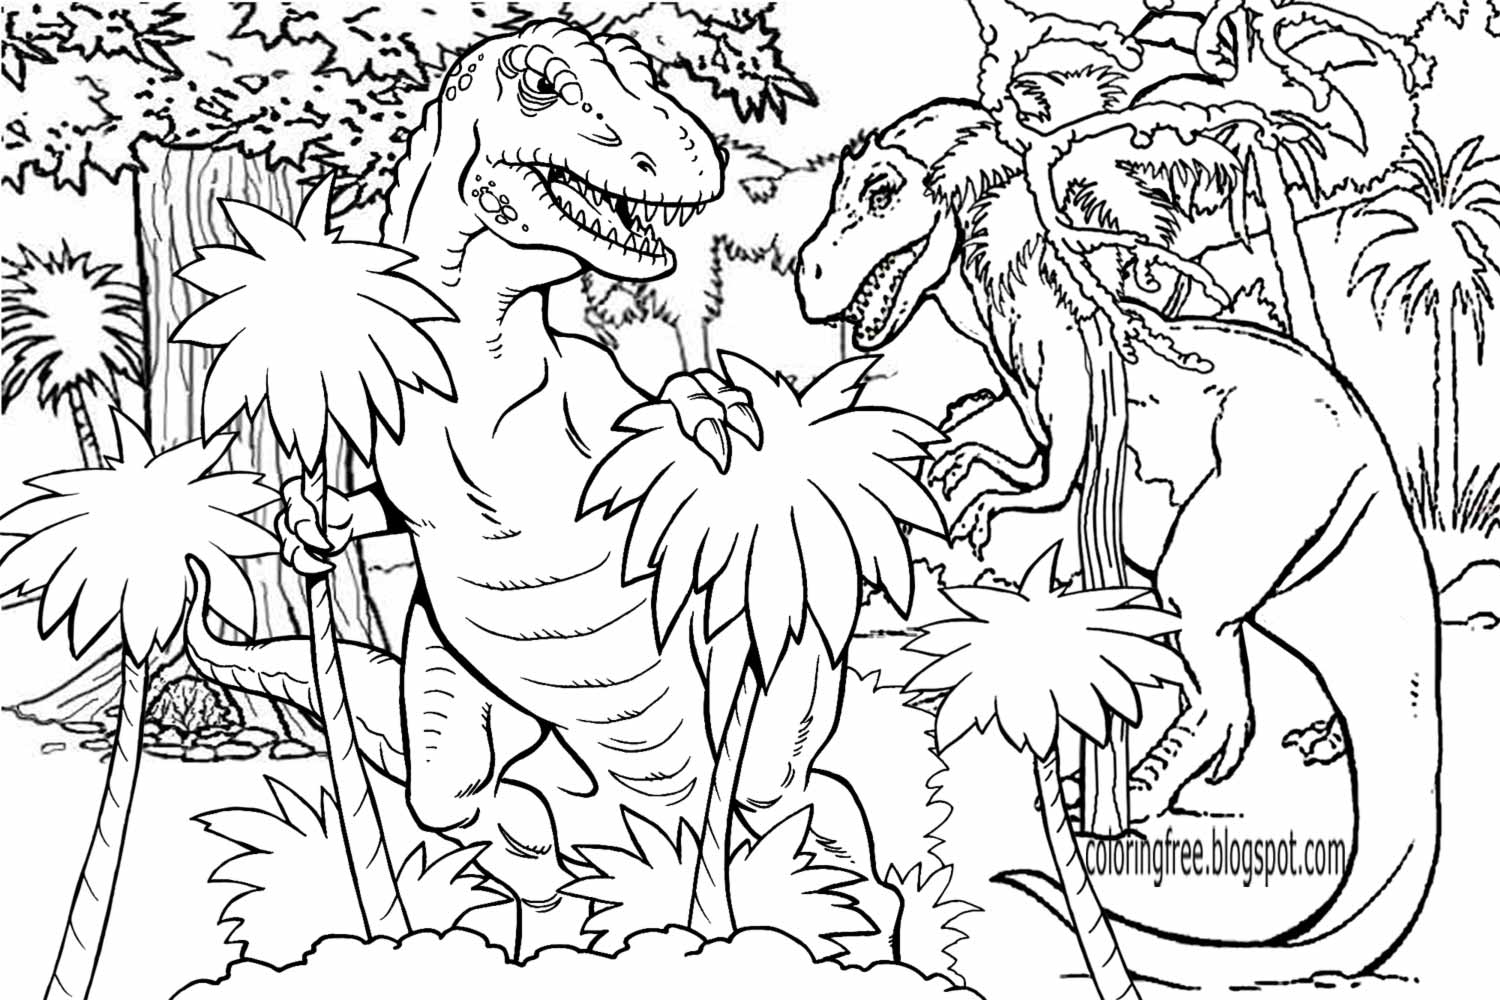 Download LETS COLORING BOOK: Prehistoric Jurassic World Dinosaurs Park Science Fiction Coloring Pages